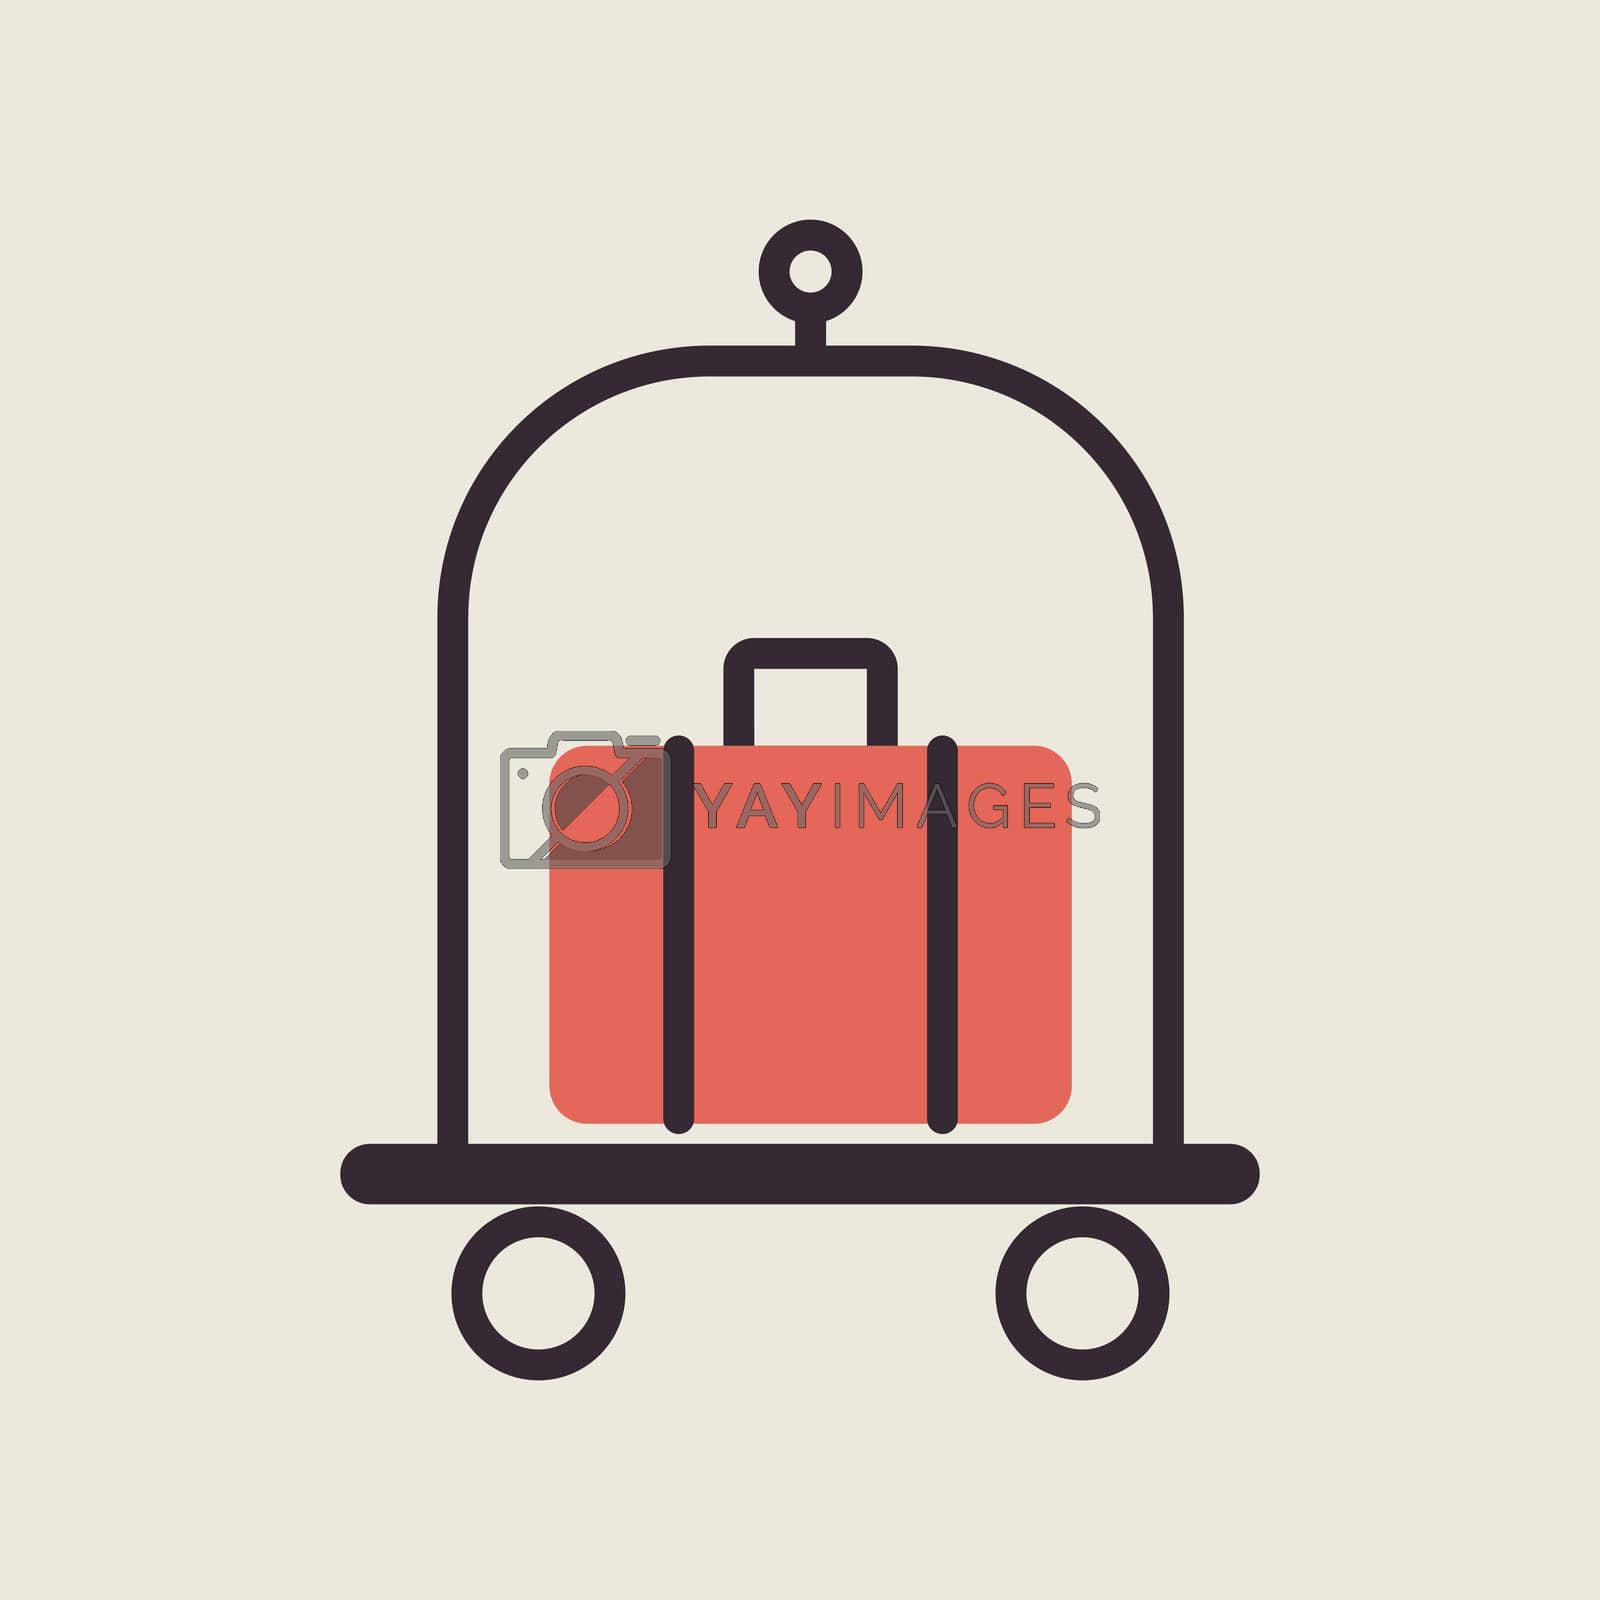 Royalty free image of Baggage, luggage, suitcases on trolley vector icon by nosik